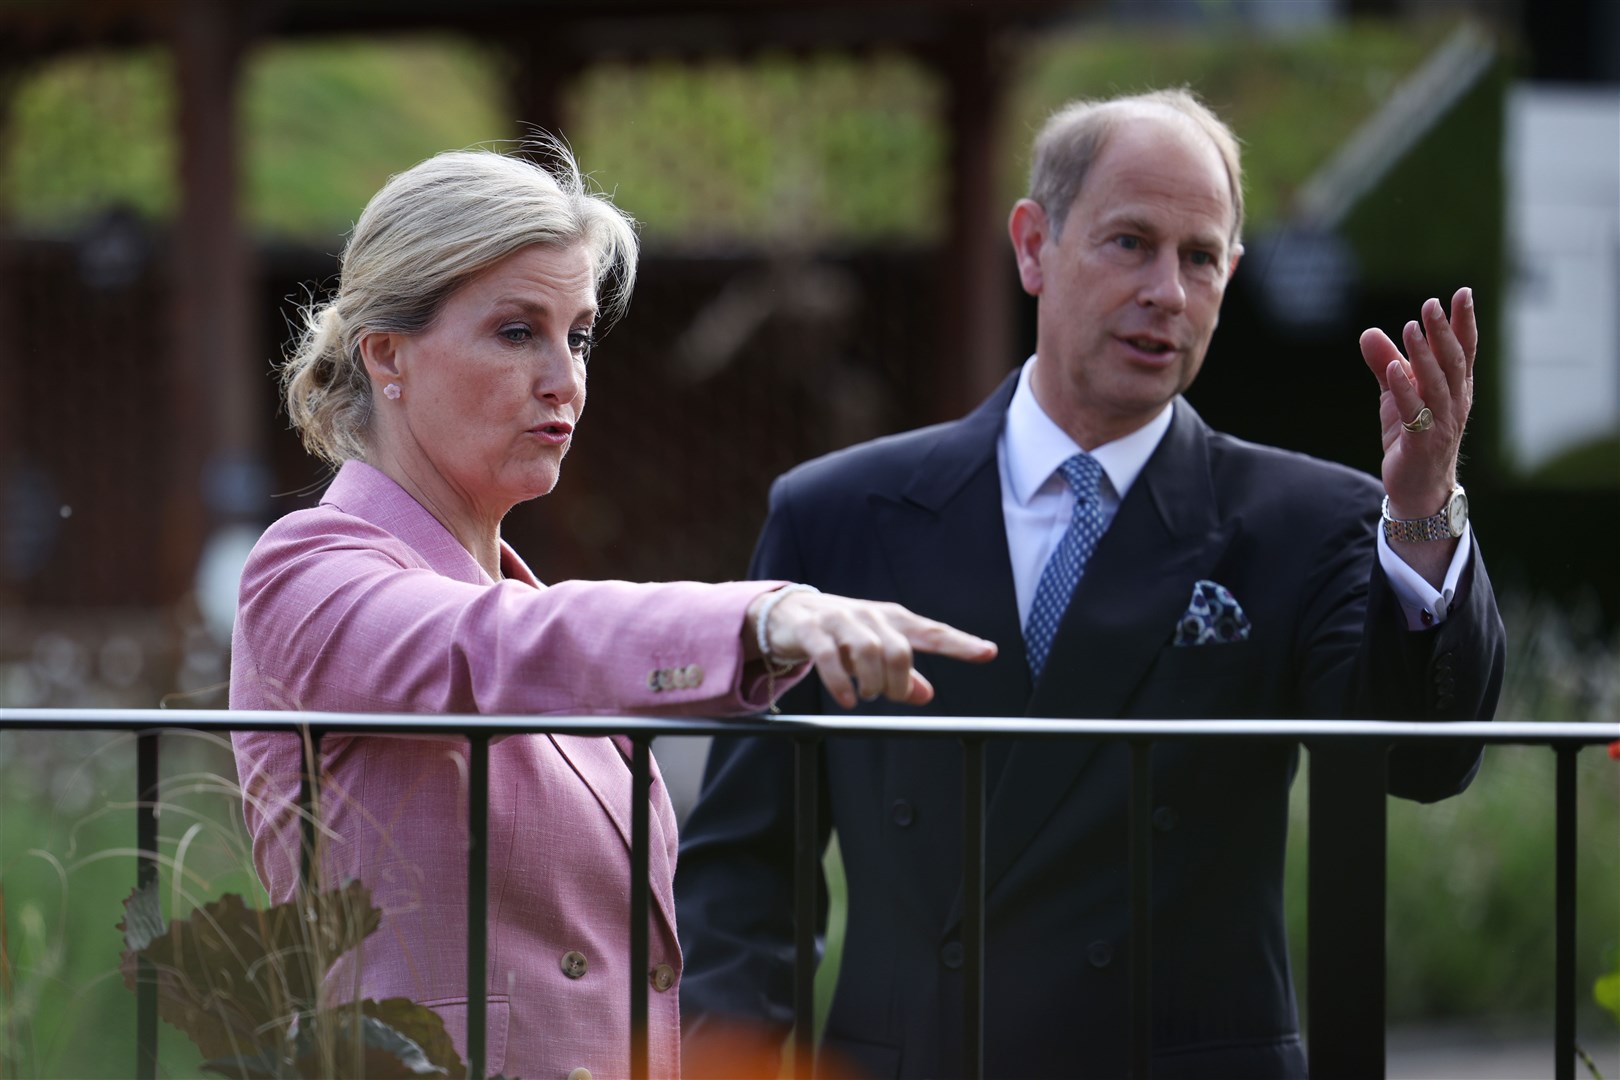 The Earl and Countess of Wessex will visit Northern Ireland (Dan Kitwood/PA)